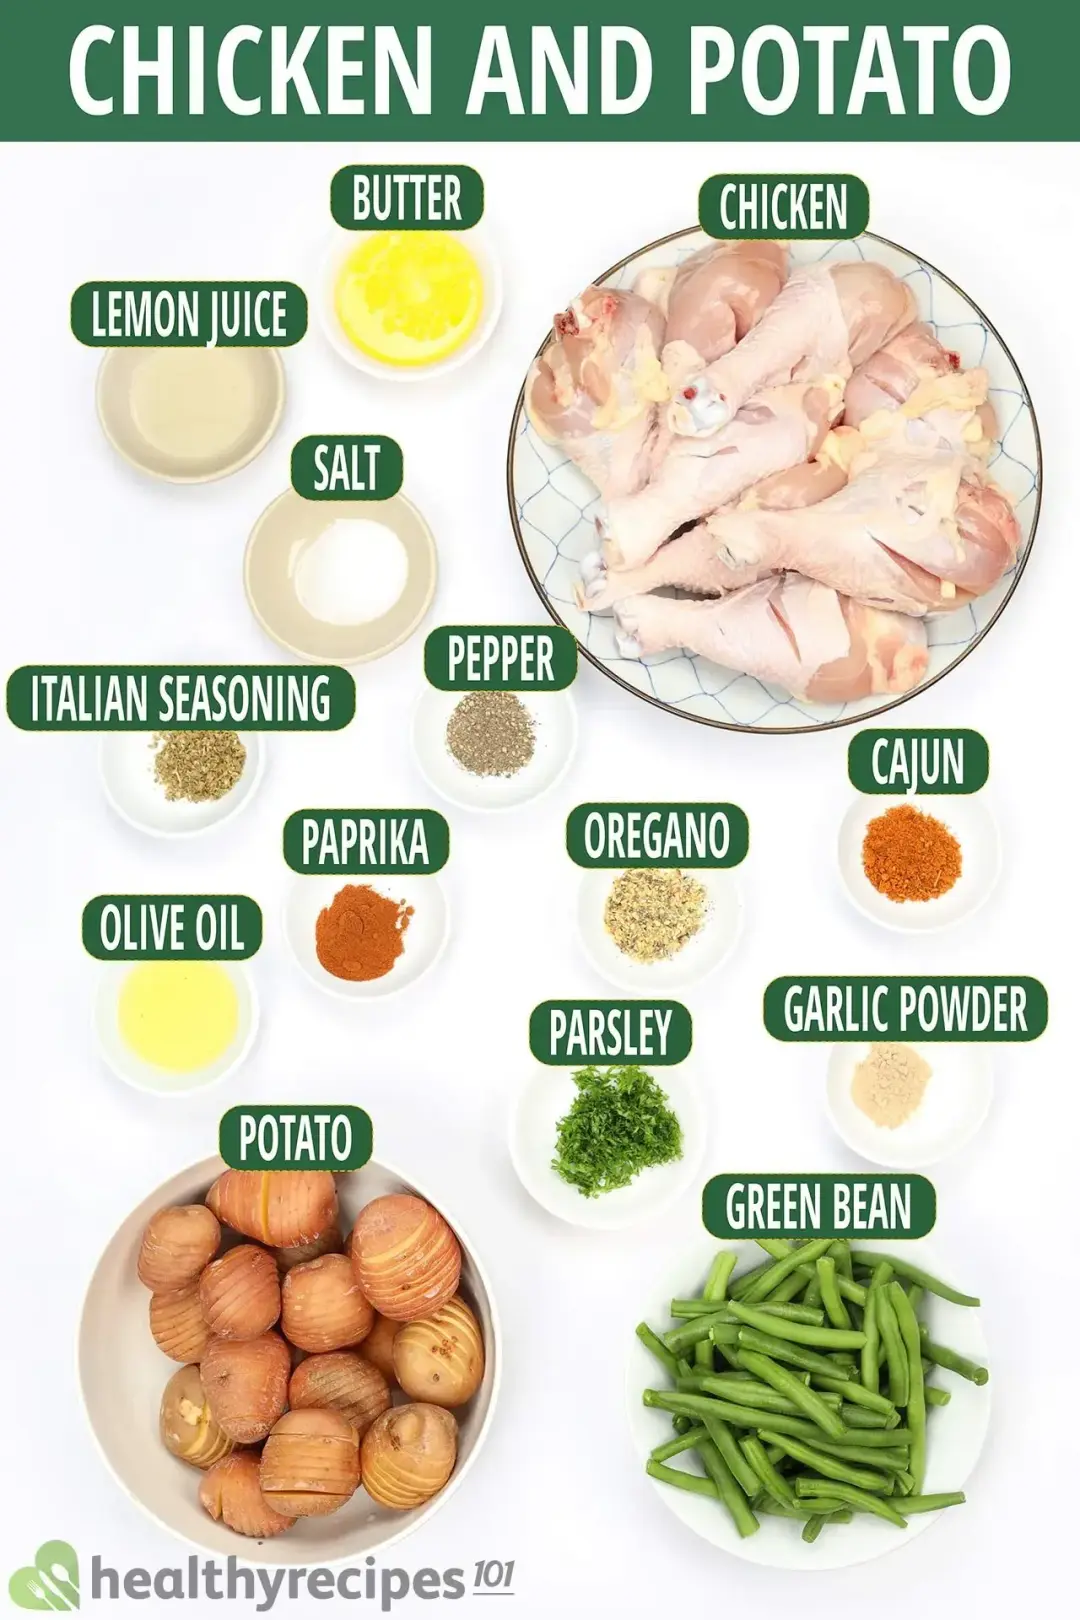 Ingredients for Chicken And Potatoes